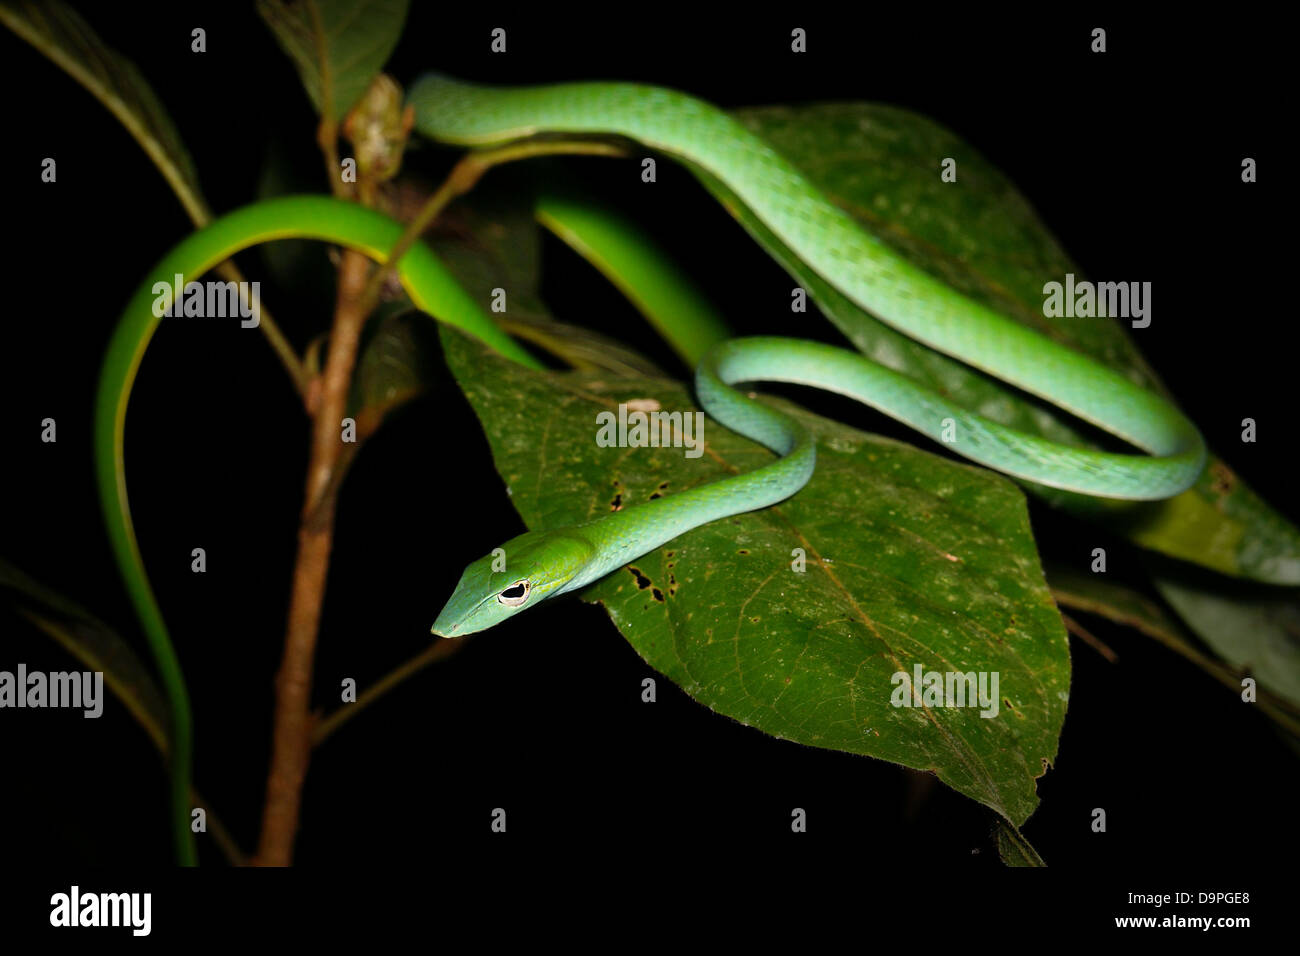 Green vine snake,or oriental whip snake. Found in China, India, Philippines, Vietnam, Indonesia, Malaysia, Thailand, Myanmar etc Stock Photo